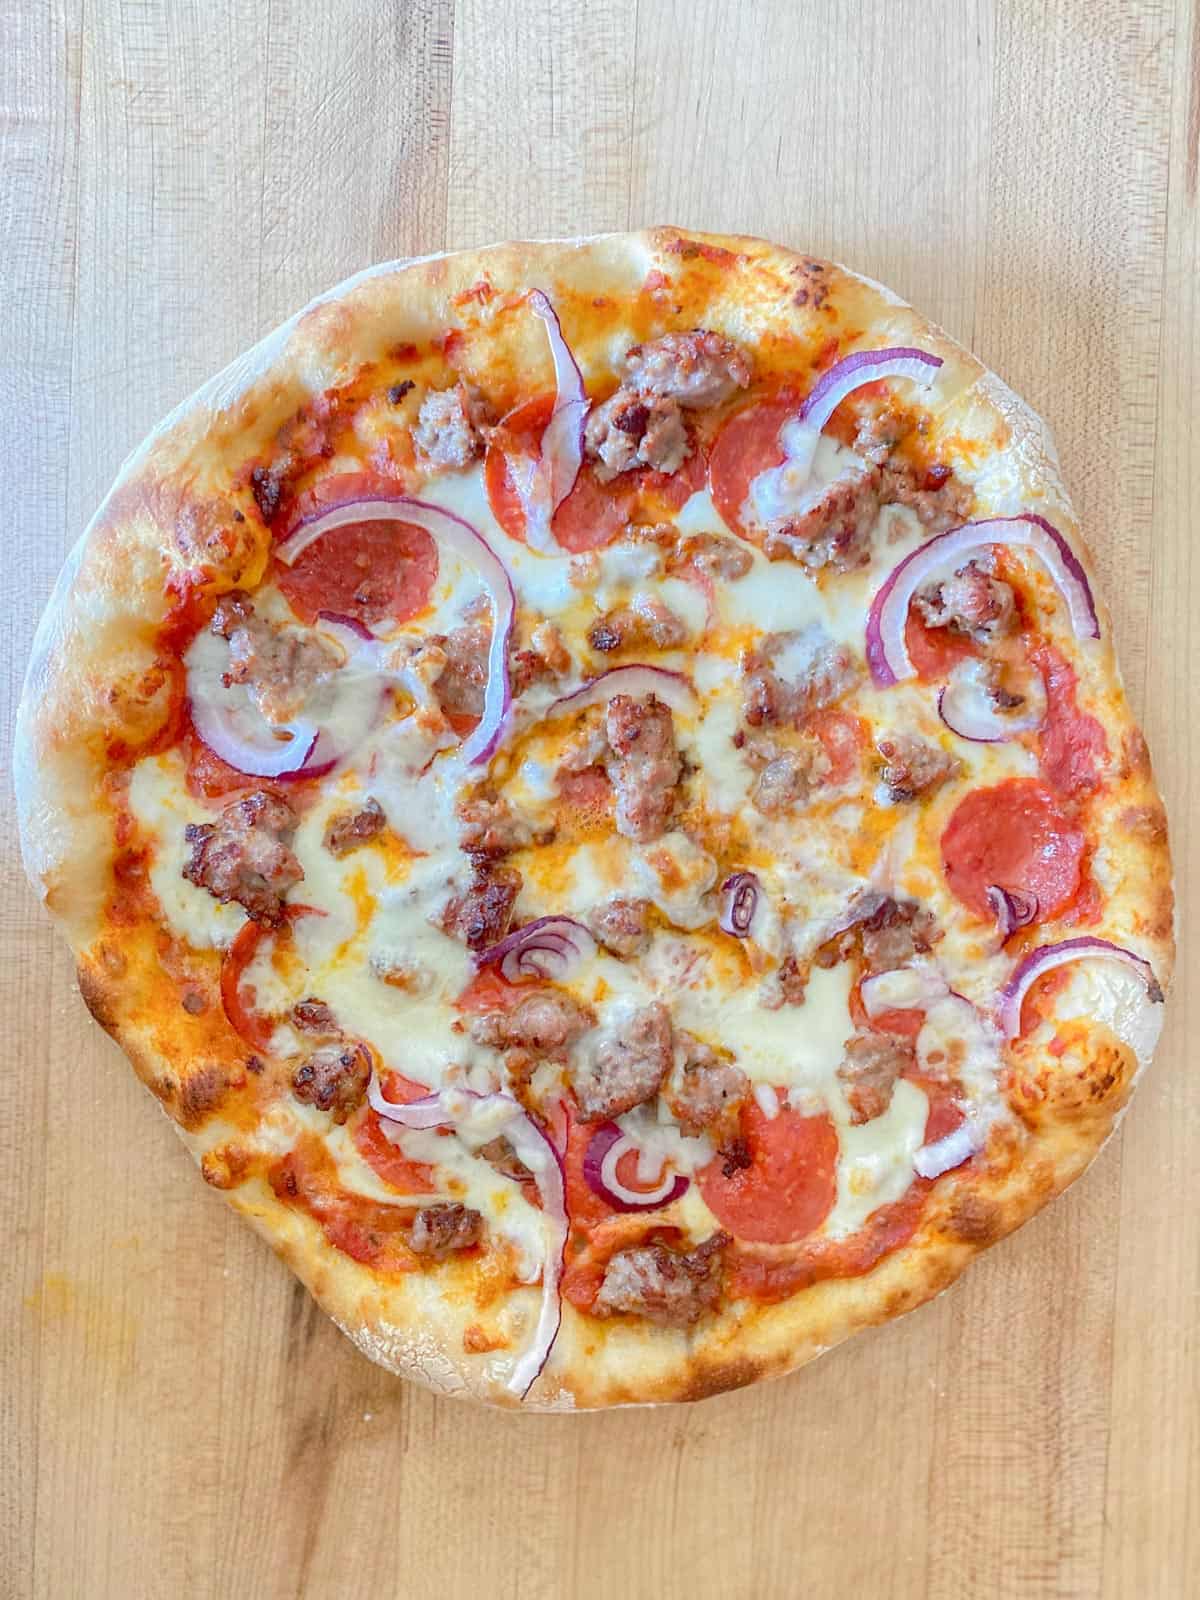 homemade pizza dough topped with sausage and pepperoni